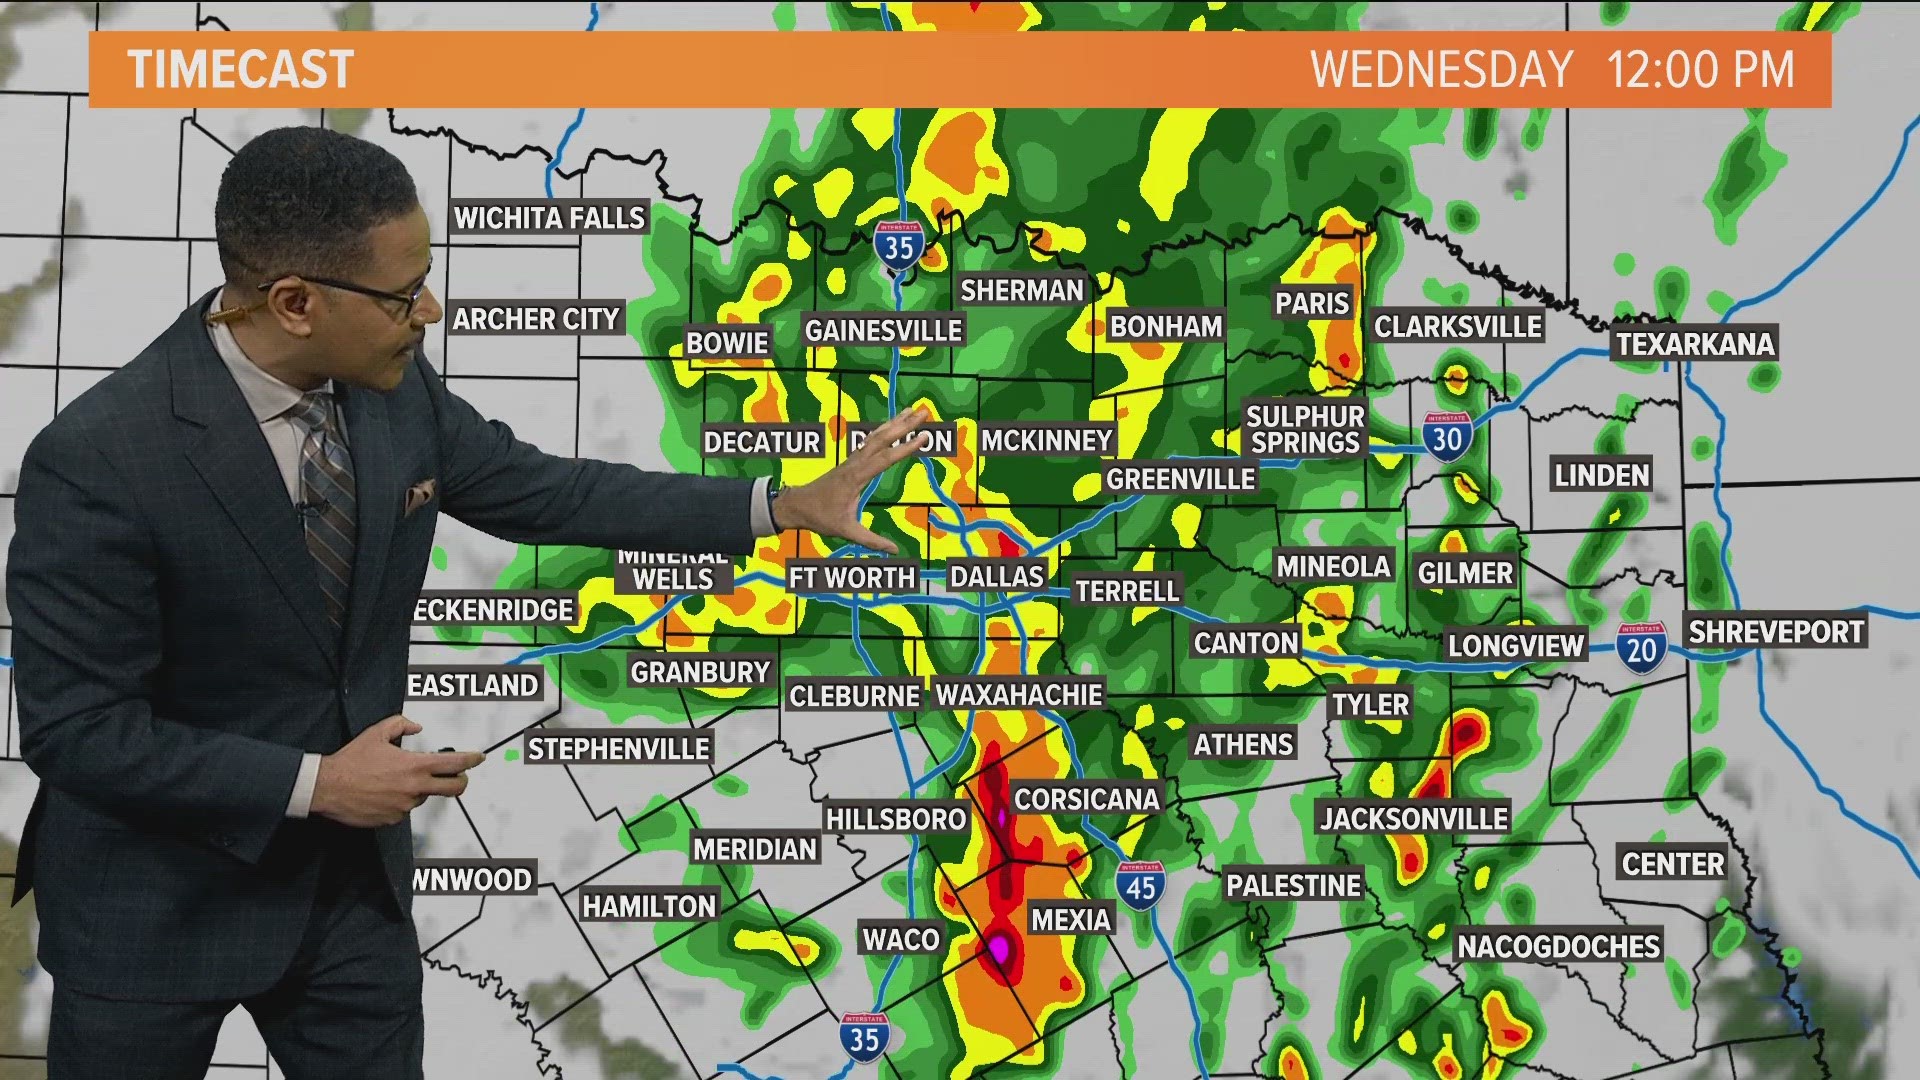 Any showers or storms will move out of North Texas by Wednesday evening into Wednesday night